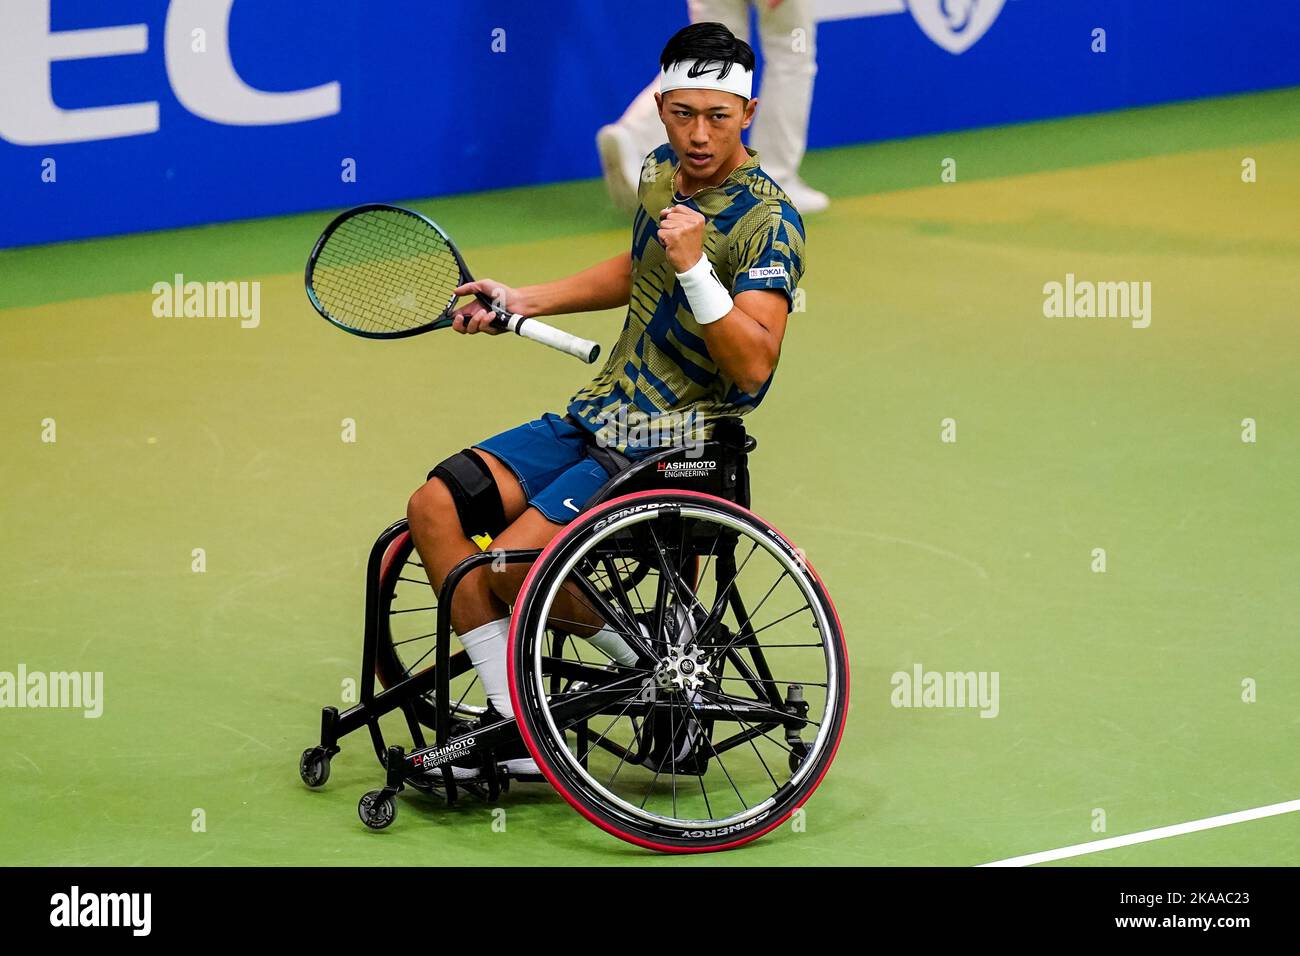 OSS, NETHERLANDS - NOVEMBER 1: Tokito Oda of Japan celebrates during his match against Alfie Hewett of Great Britain during Day 3 of the 2022 ITF Wheelchair Tennis Masters at Sportcentrum de Rusheuvel on November 1, 2022 in Oss, Netherlands (Photo by Rene Nijhuis/Orange Pictures) Stock Photo